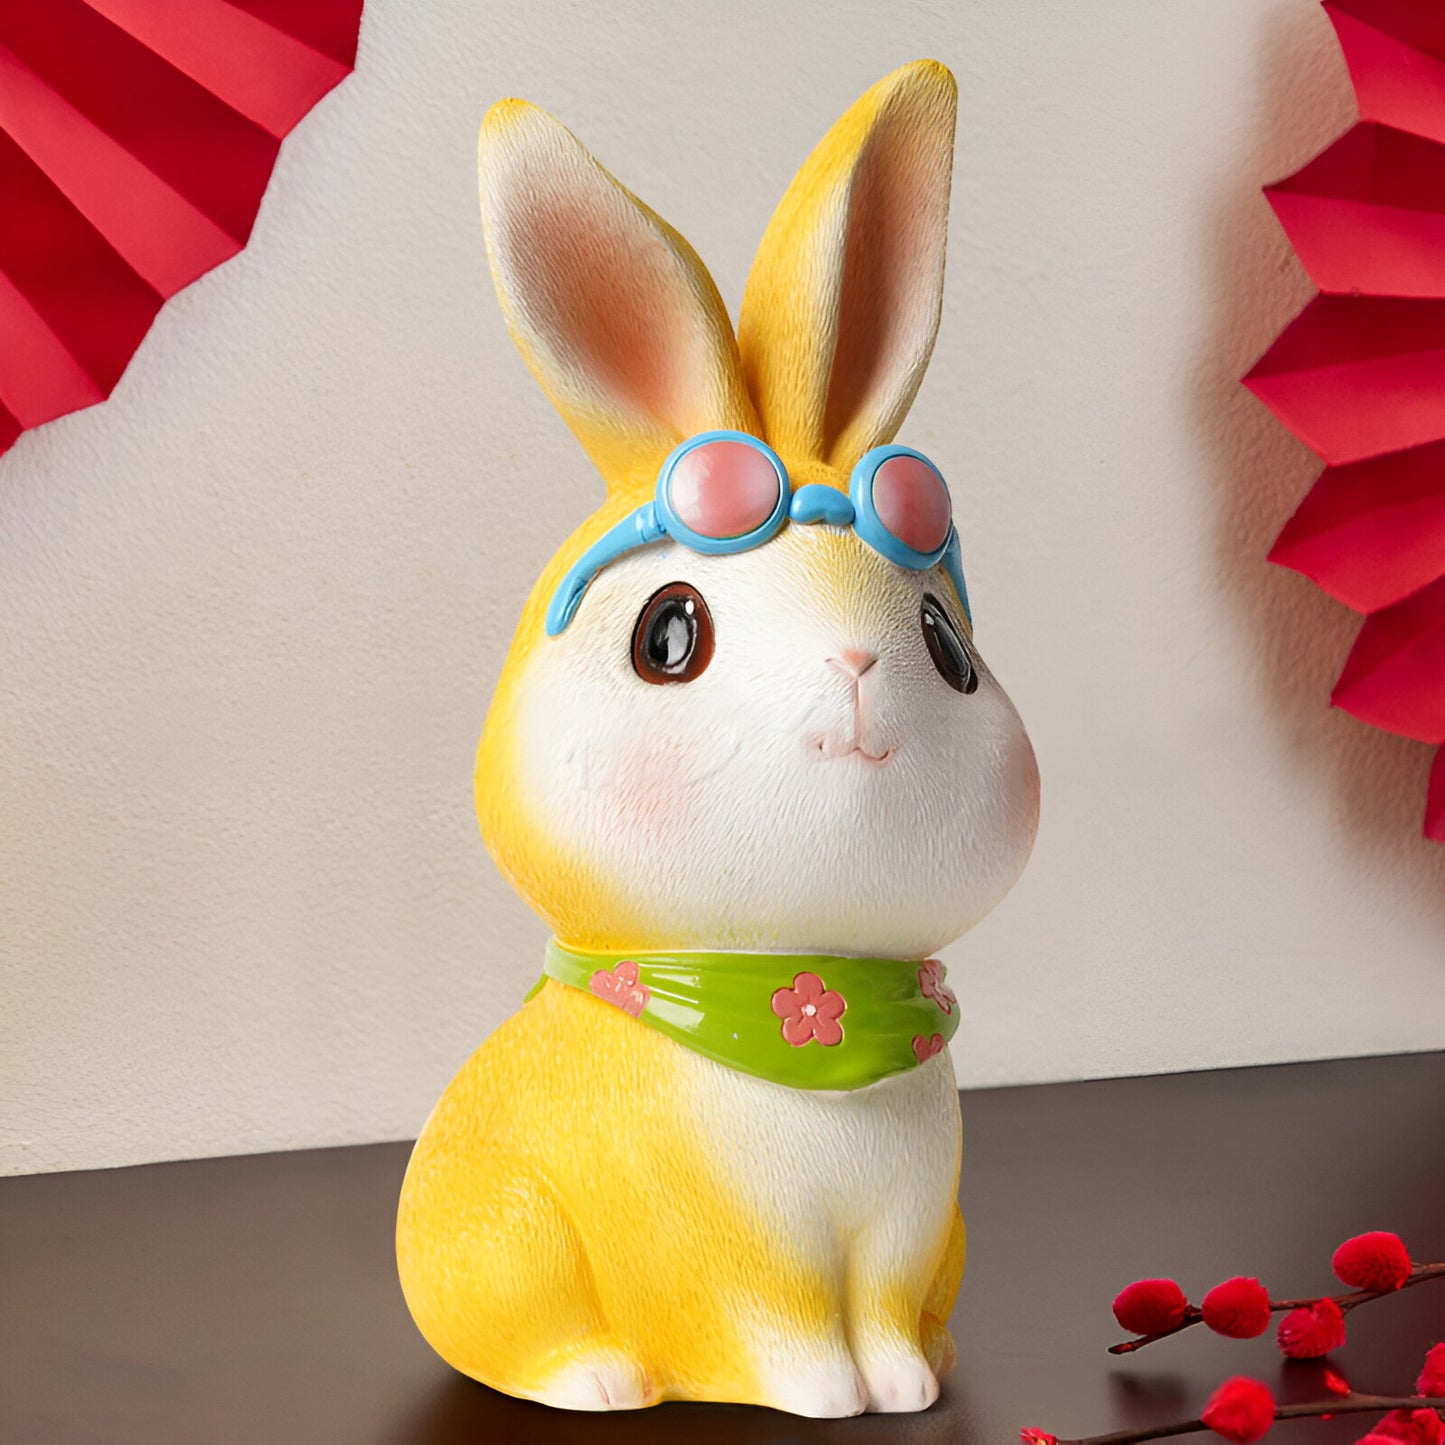 Adorable Bunny Coin Bank - Money In Only, Perfect for Kids' Birthdays, Creative Desktop Decor, 3 Colors, 4.72 x 5.51 x 10.63 Inches